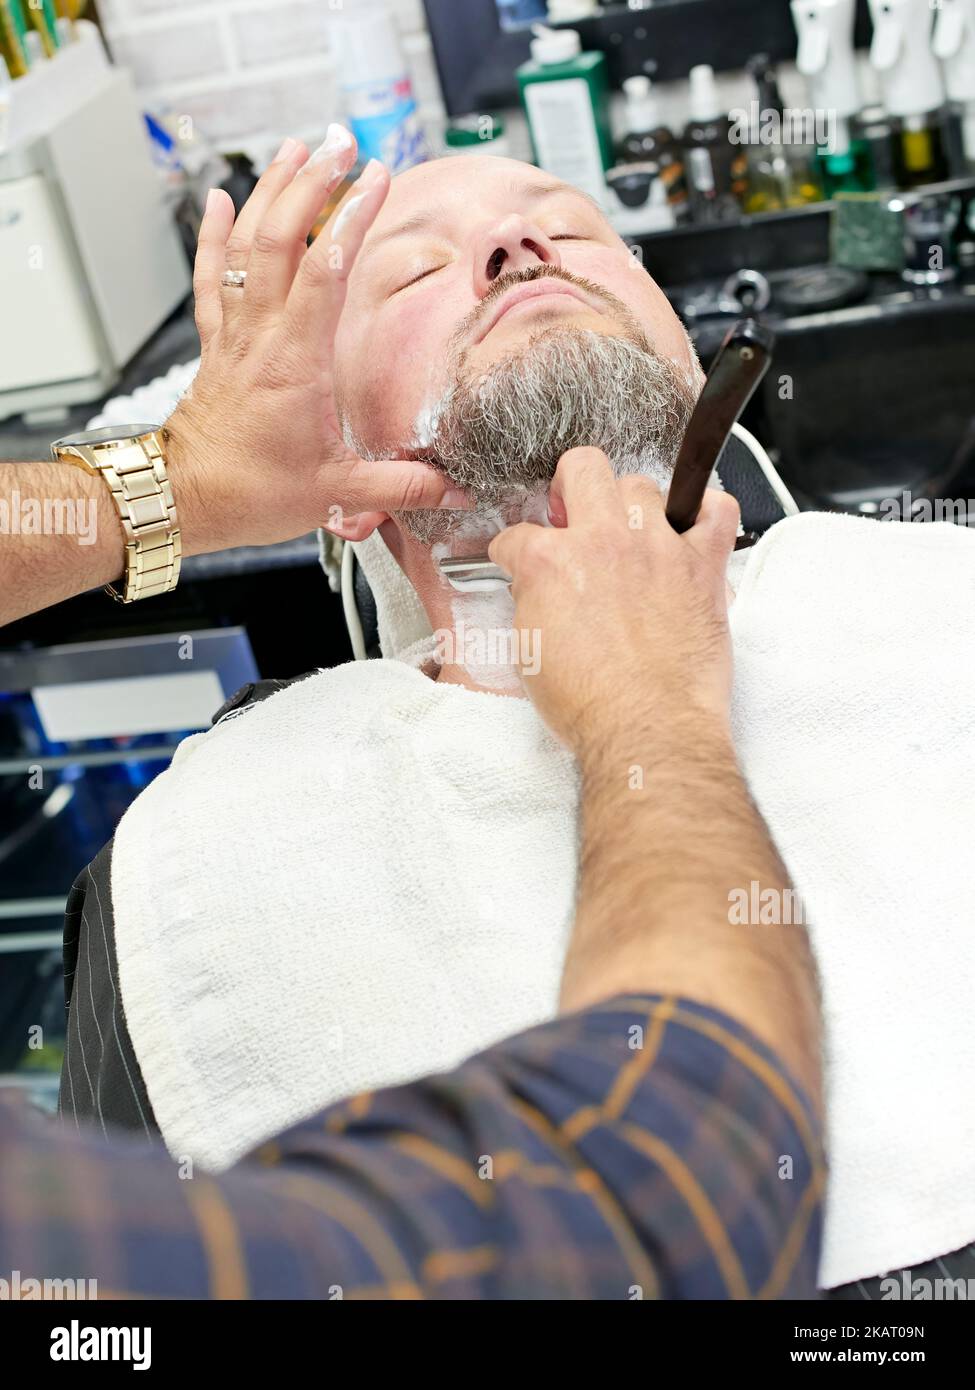 Man being shaved by a barber with an old fashioned straight razor while leaning back in a barber's chair at a barber shop. Stock Photo